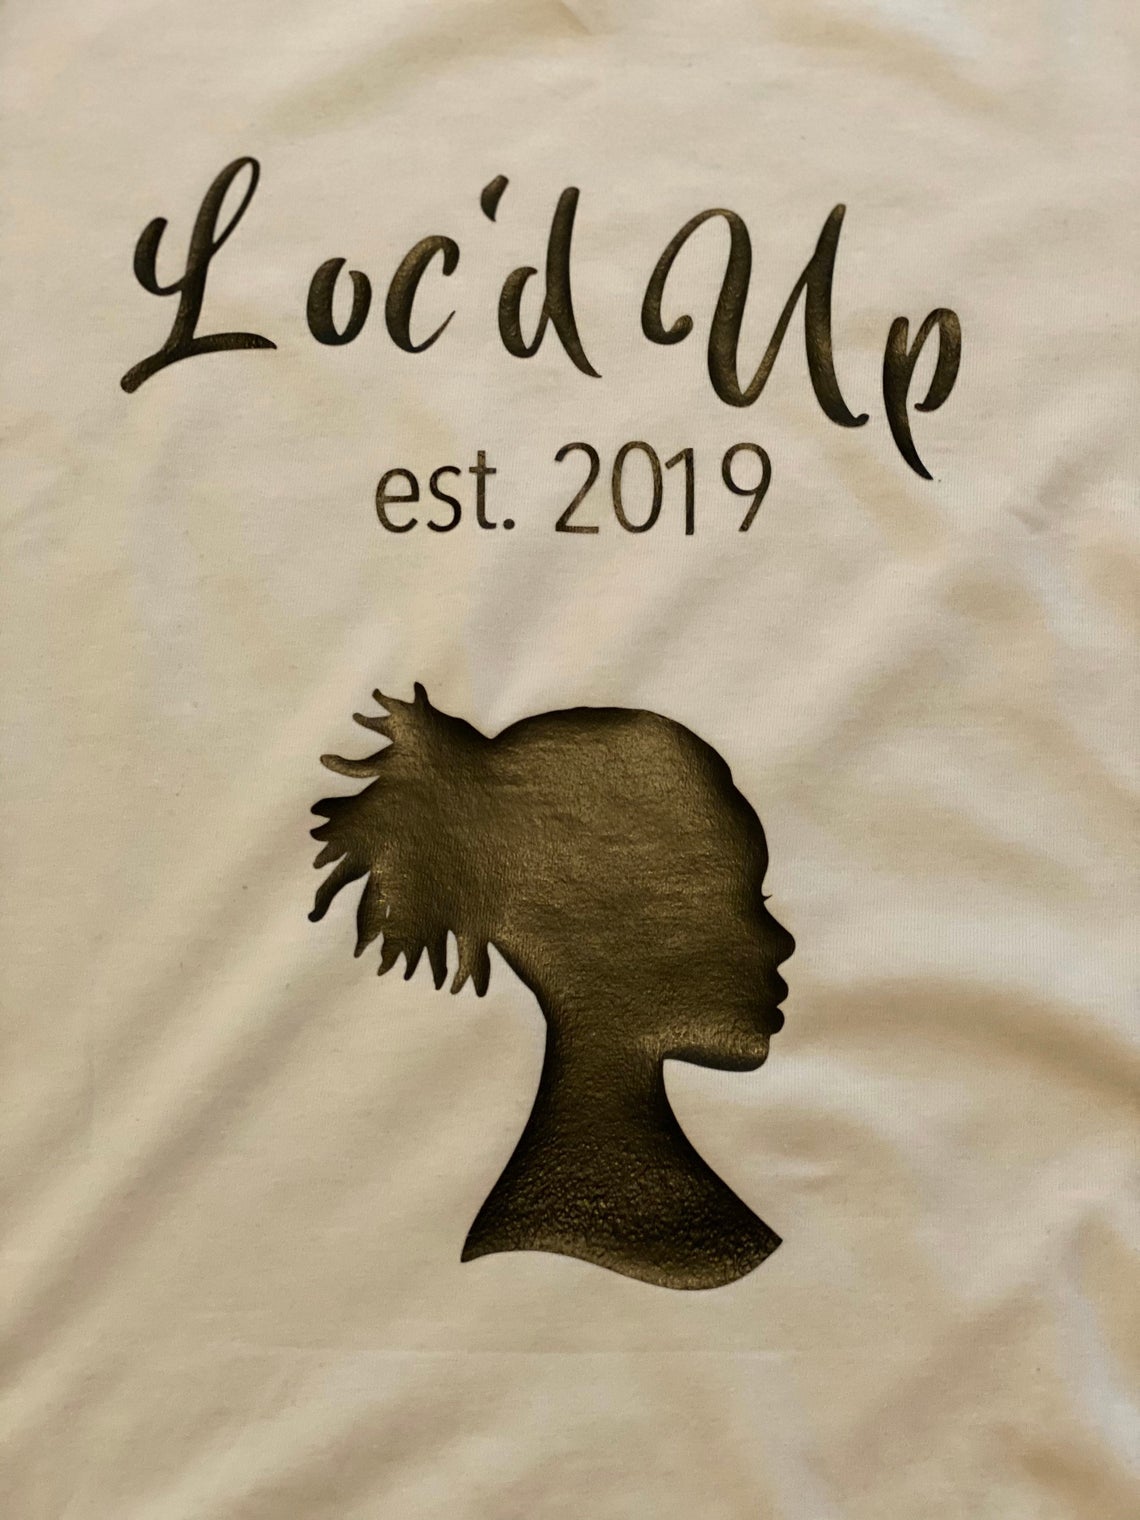 Loc Shirt for women with established date for loc anniversary